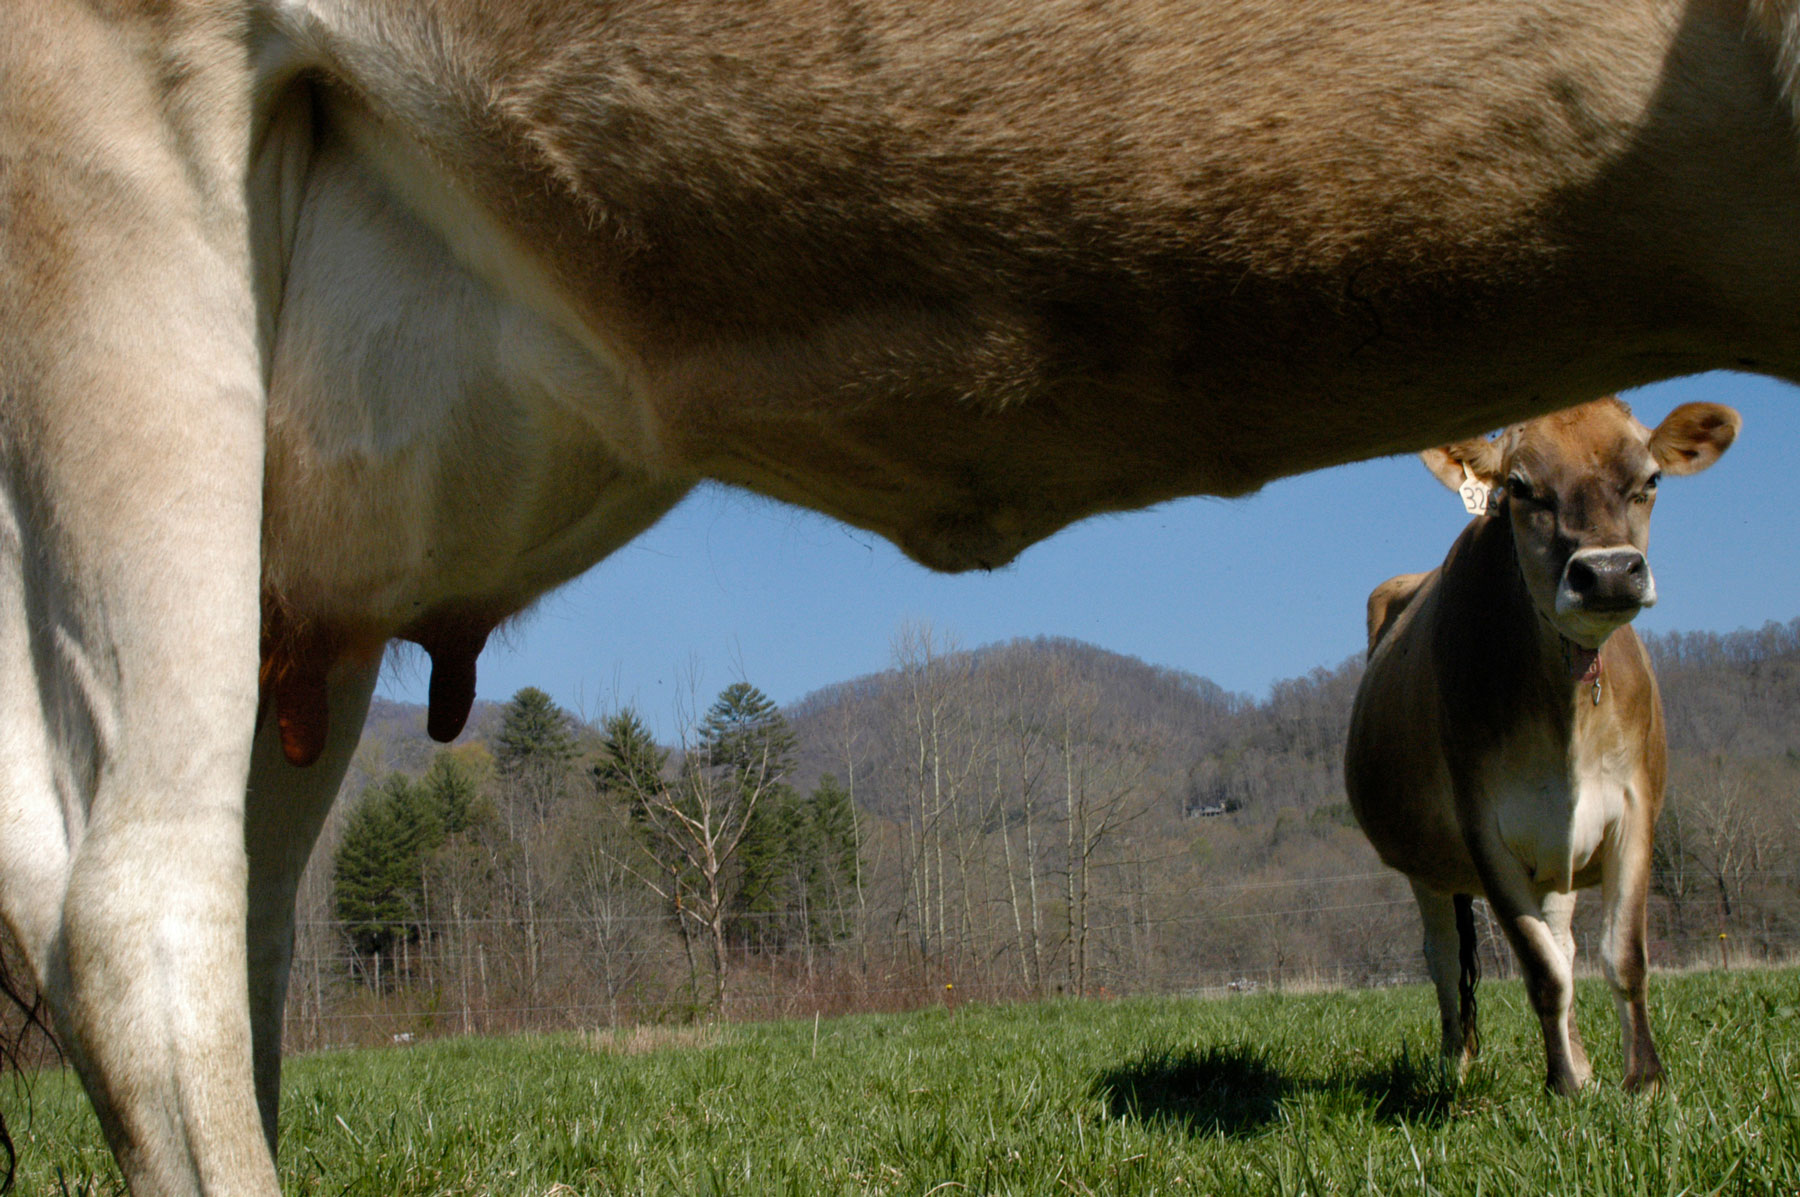 Underside of a cow with another cow in the background